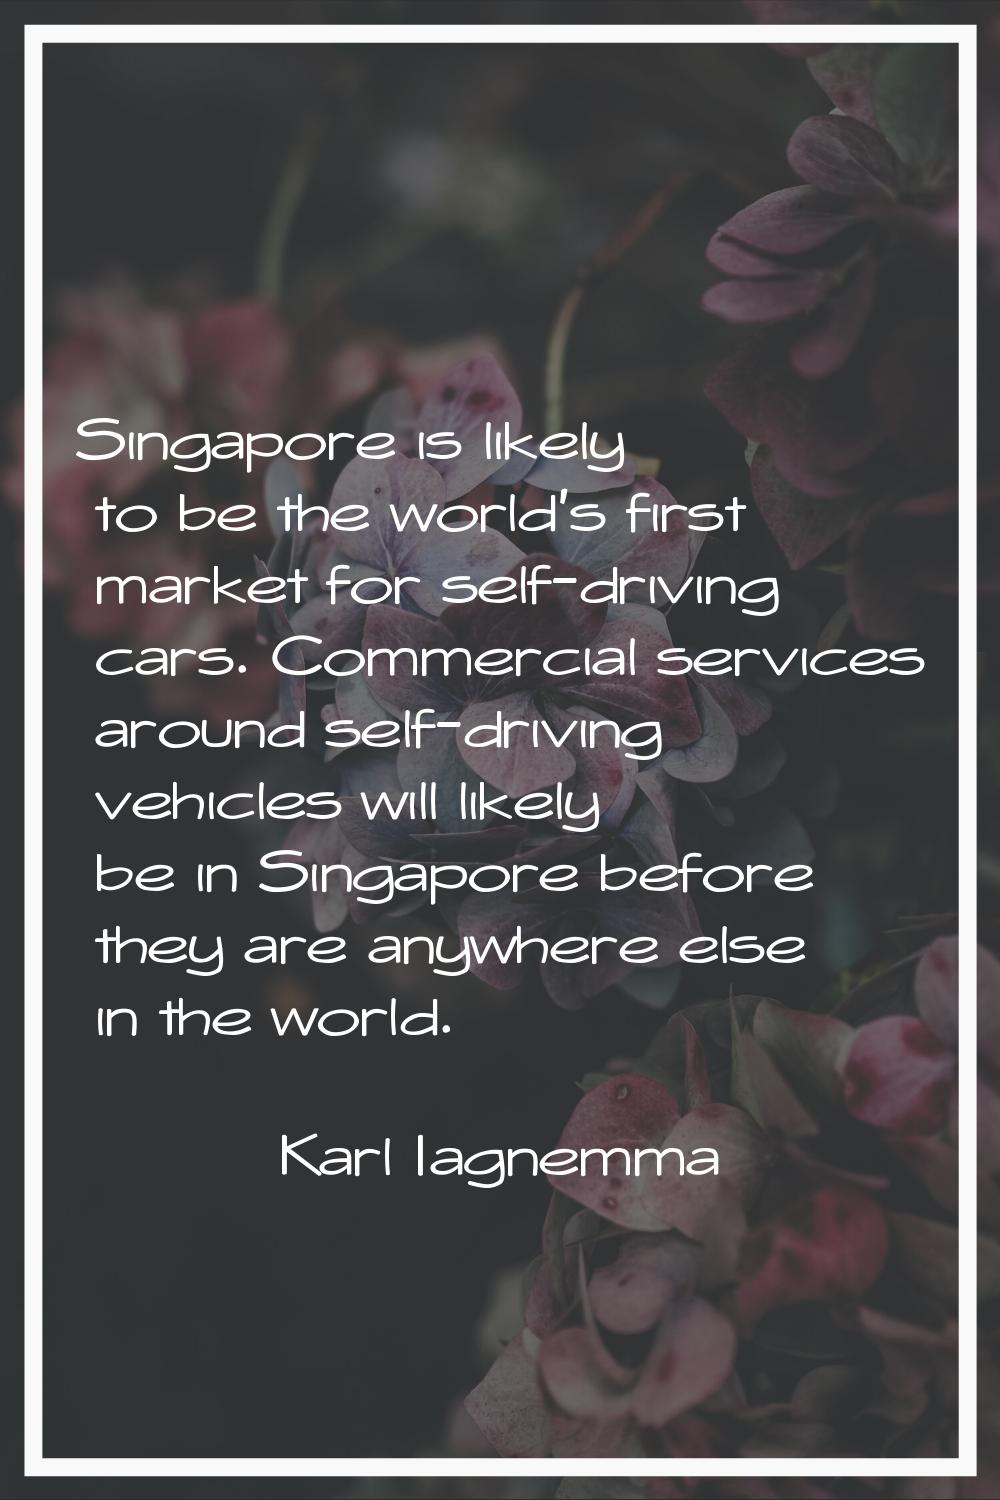 Singapore is likely to be the world's first market for self-driving cars. Commercial services aroun